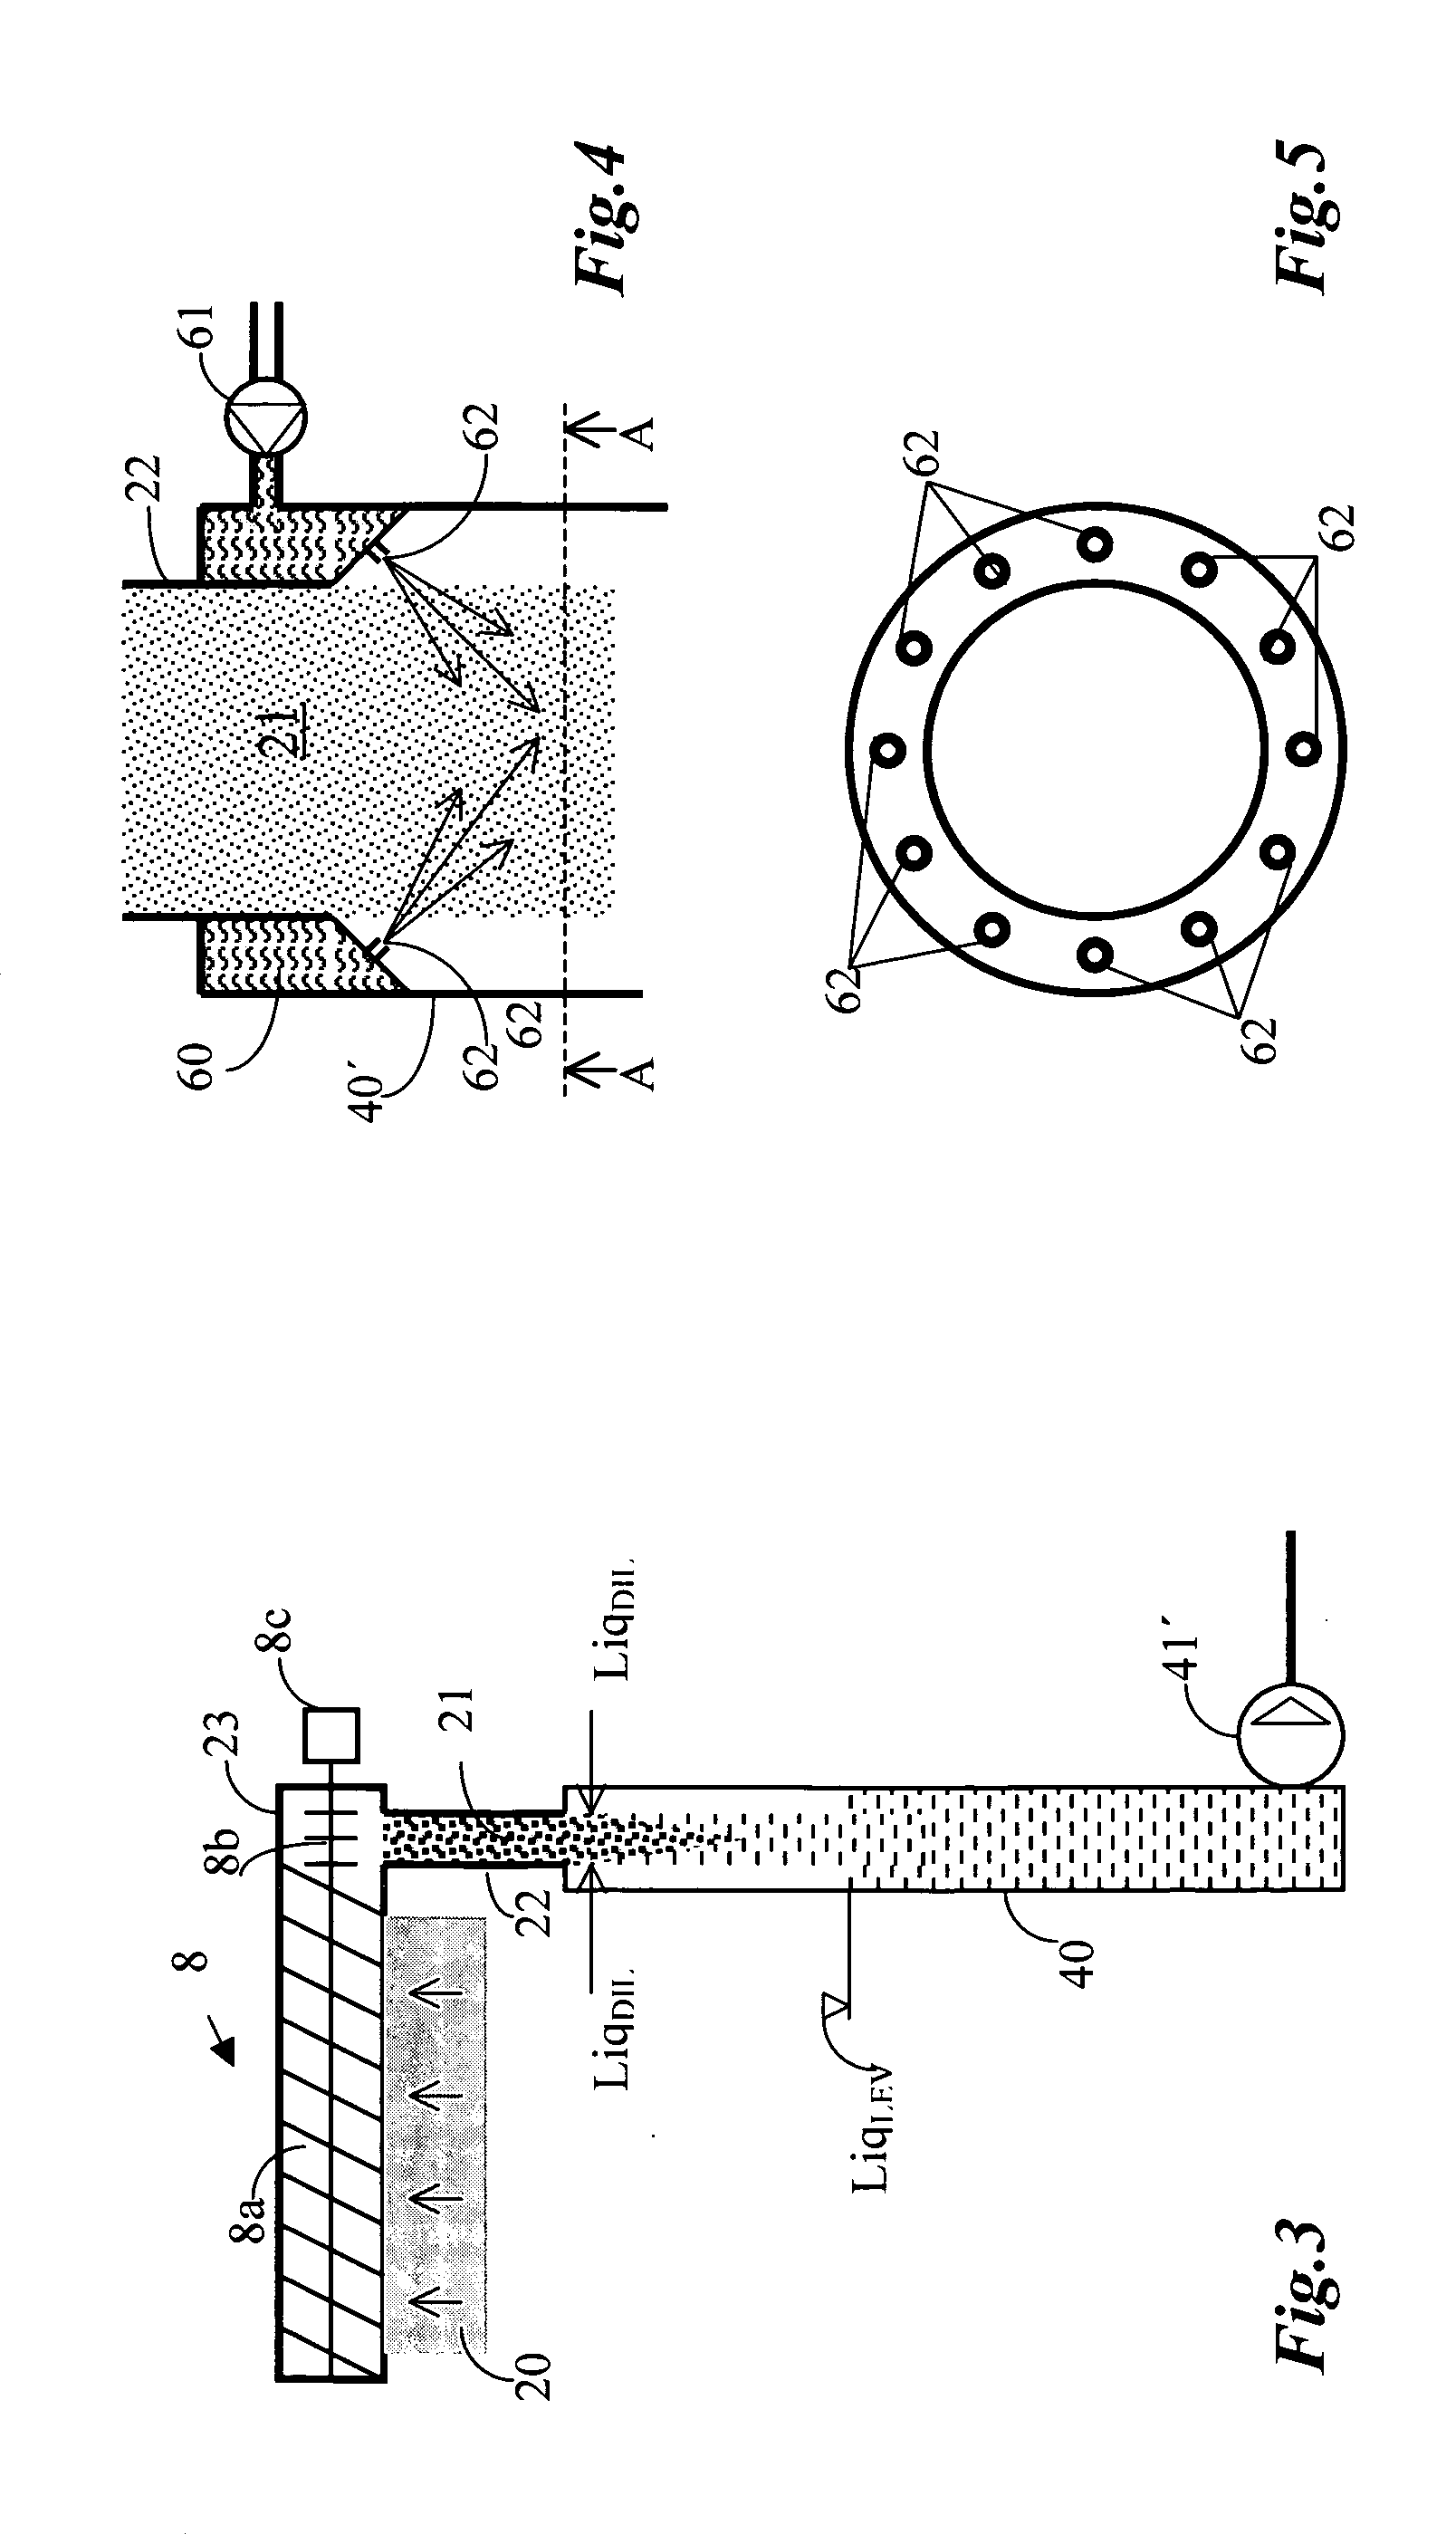 Method and device for handling cellulose pulp